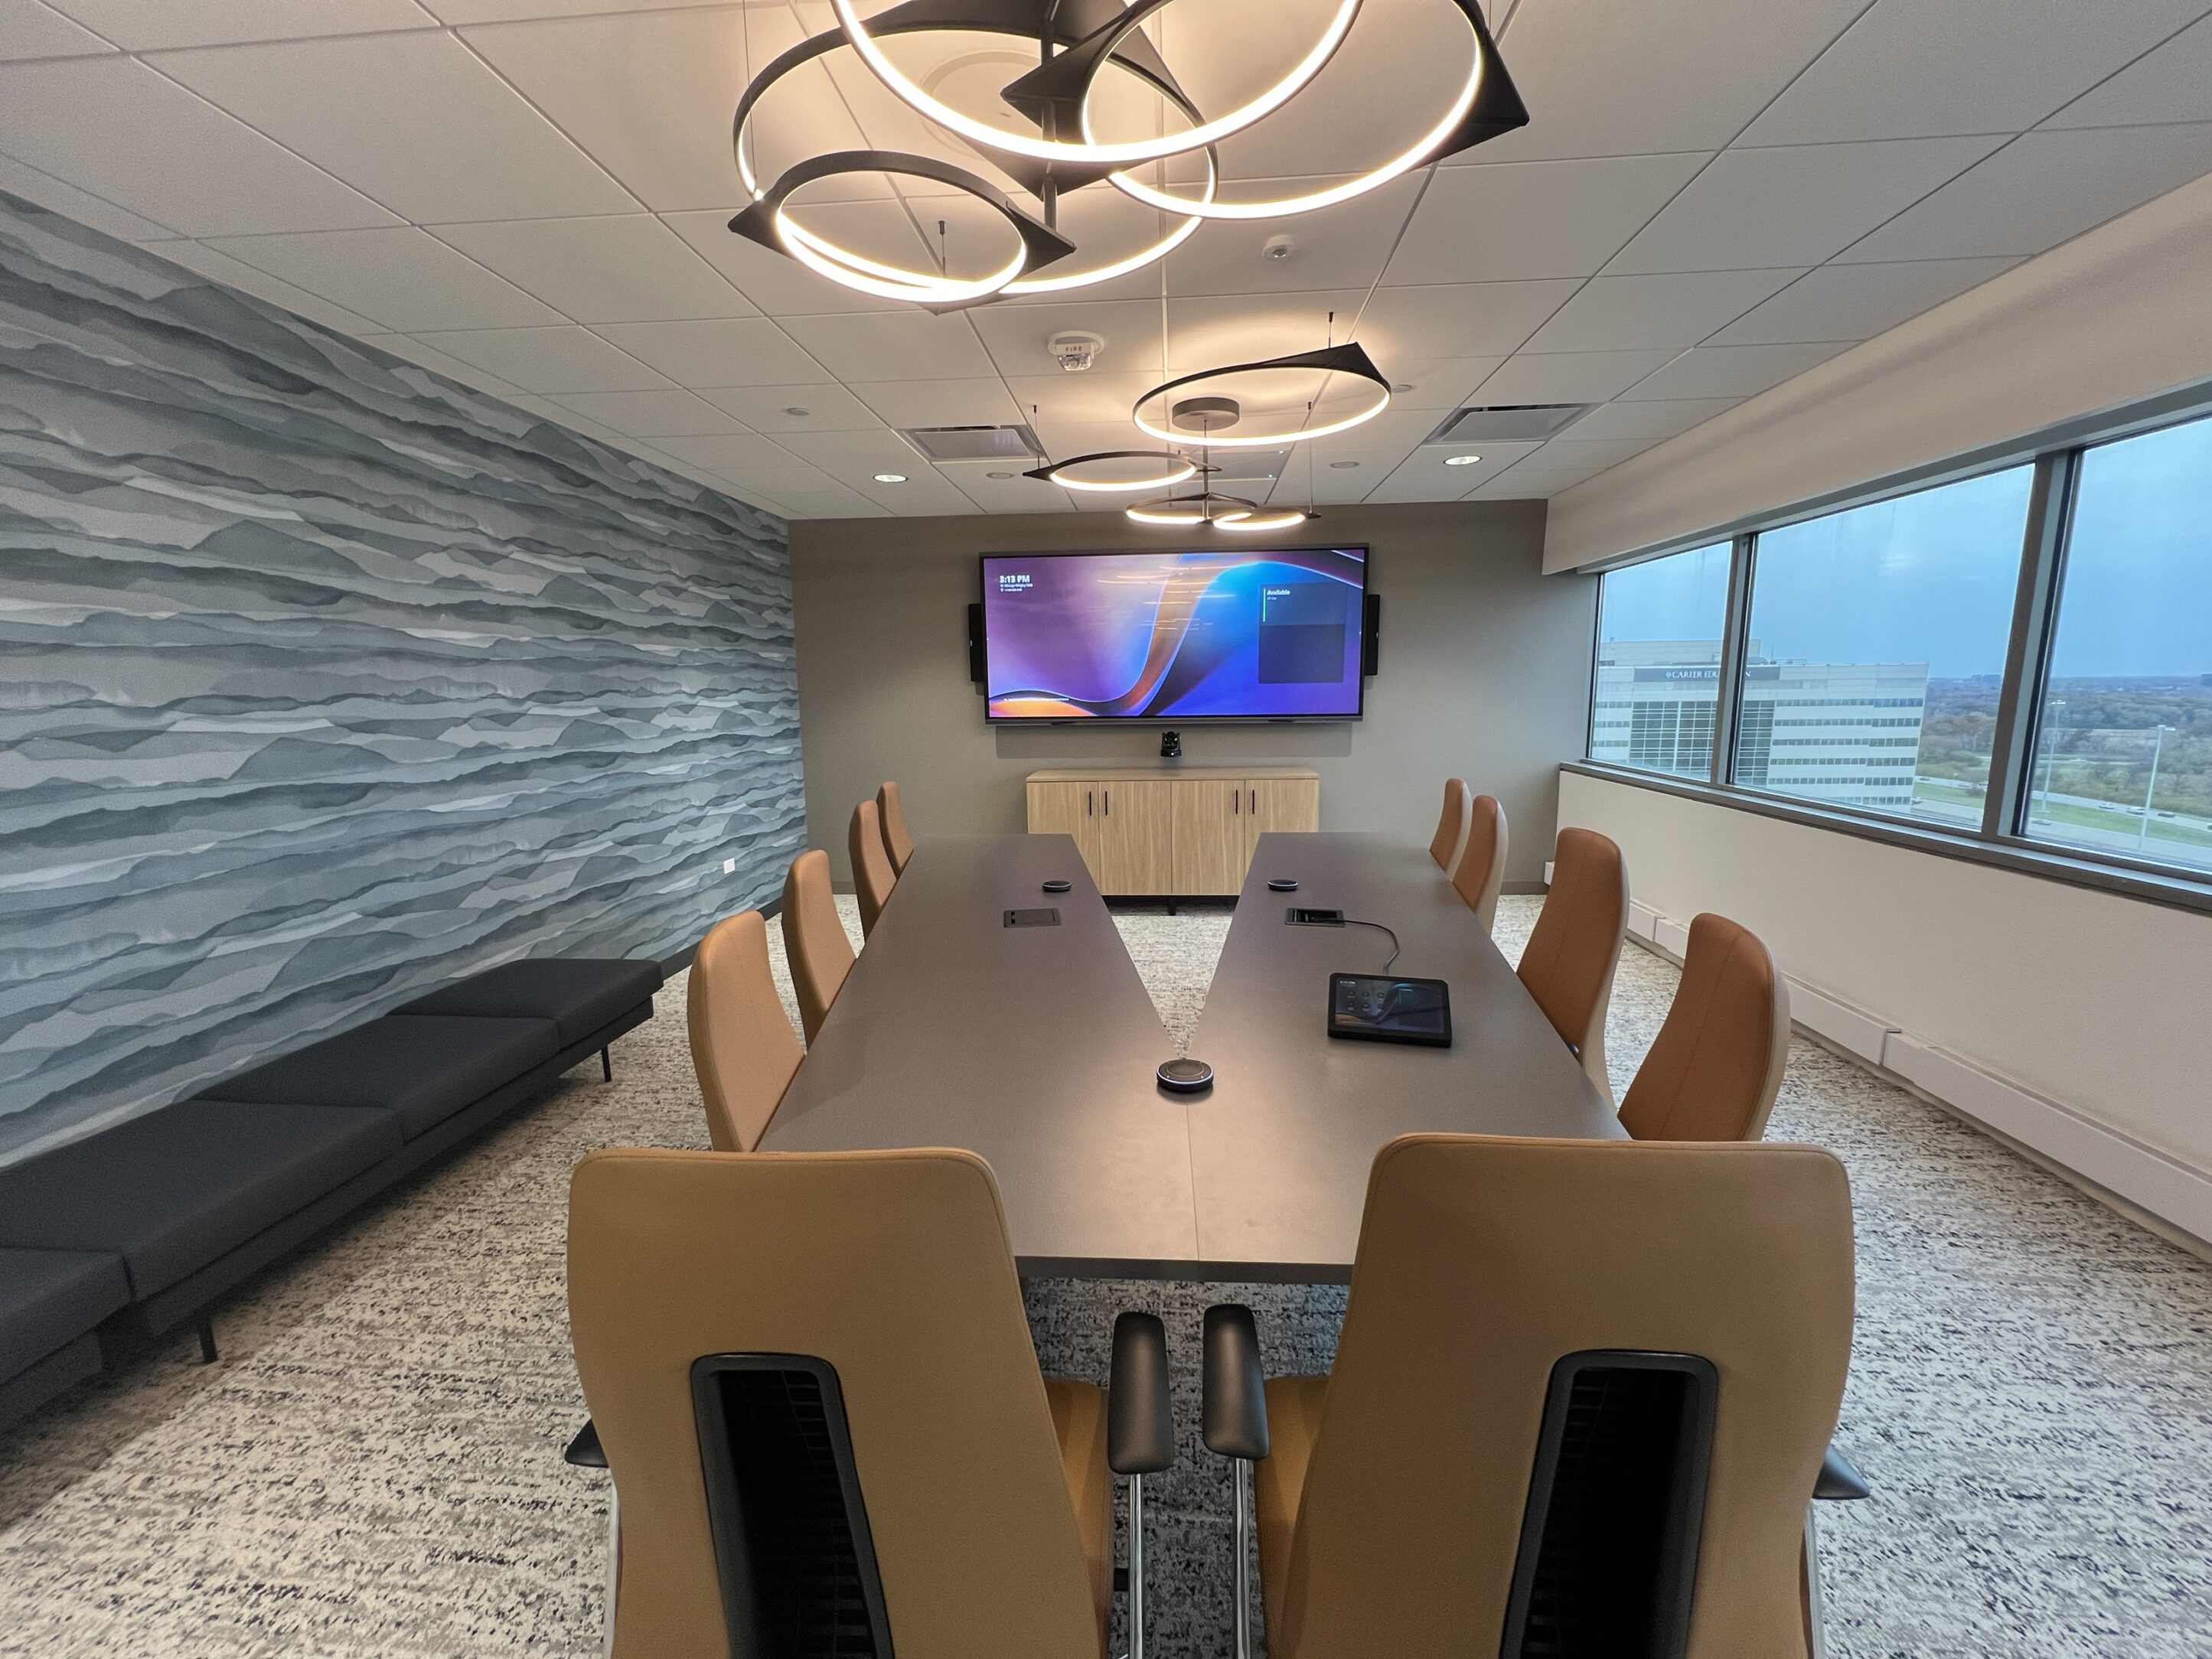 Law firm conference room audio visual